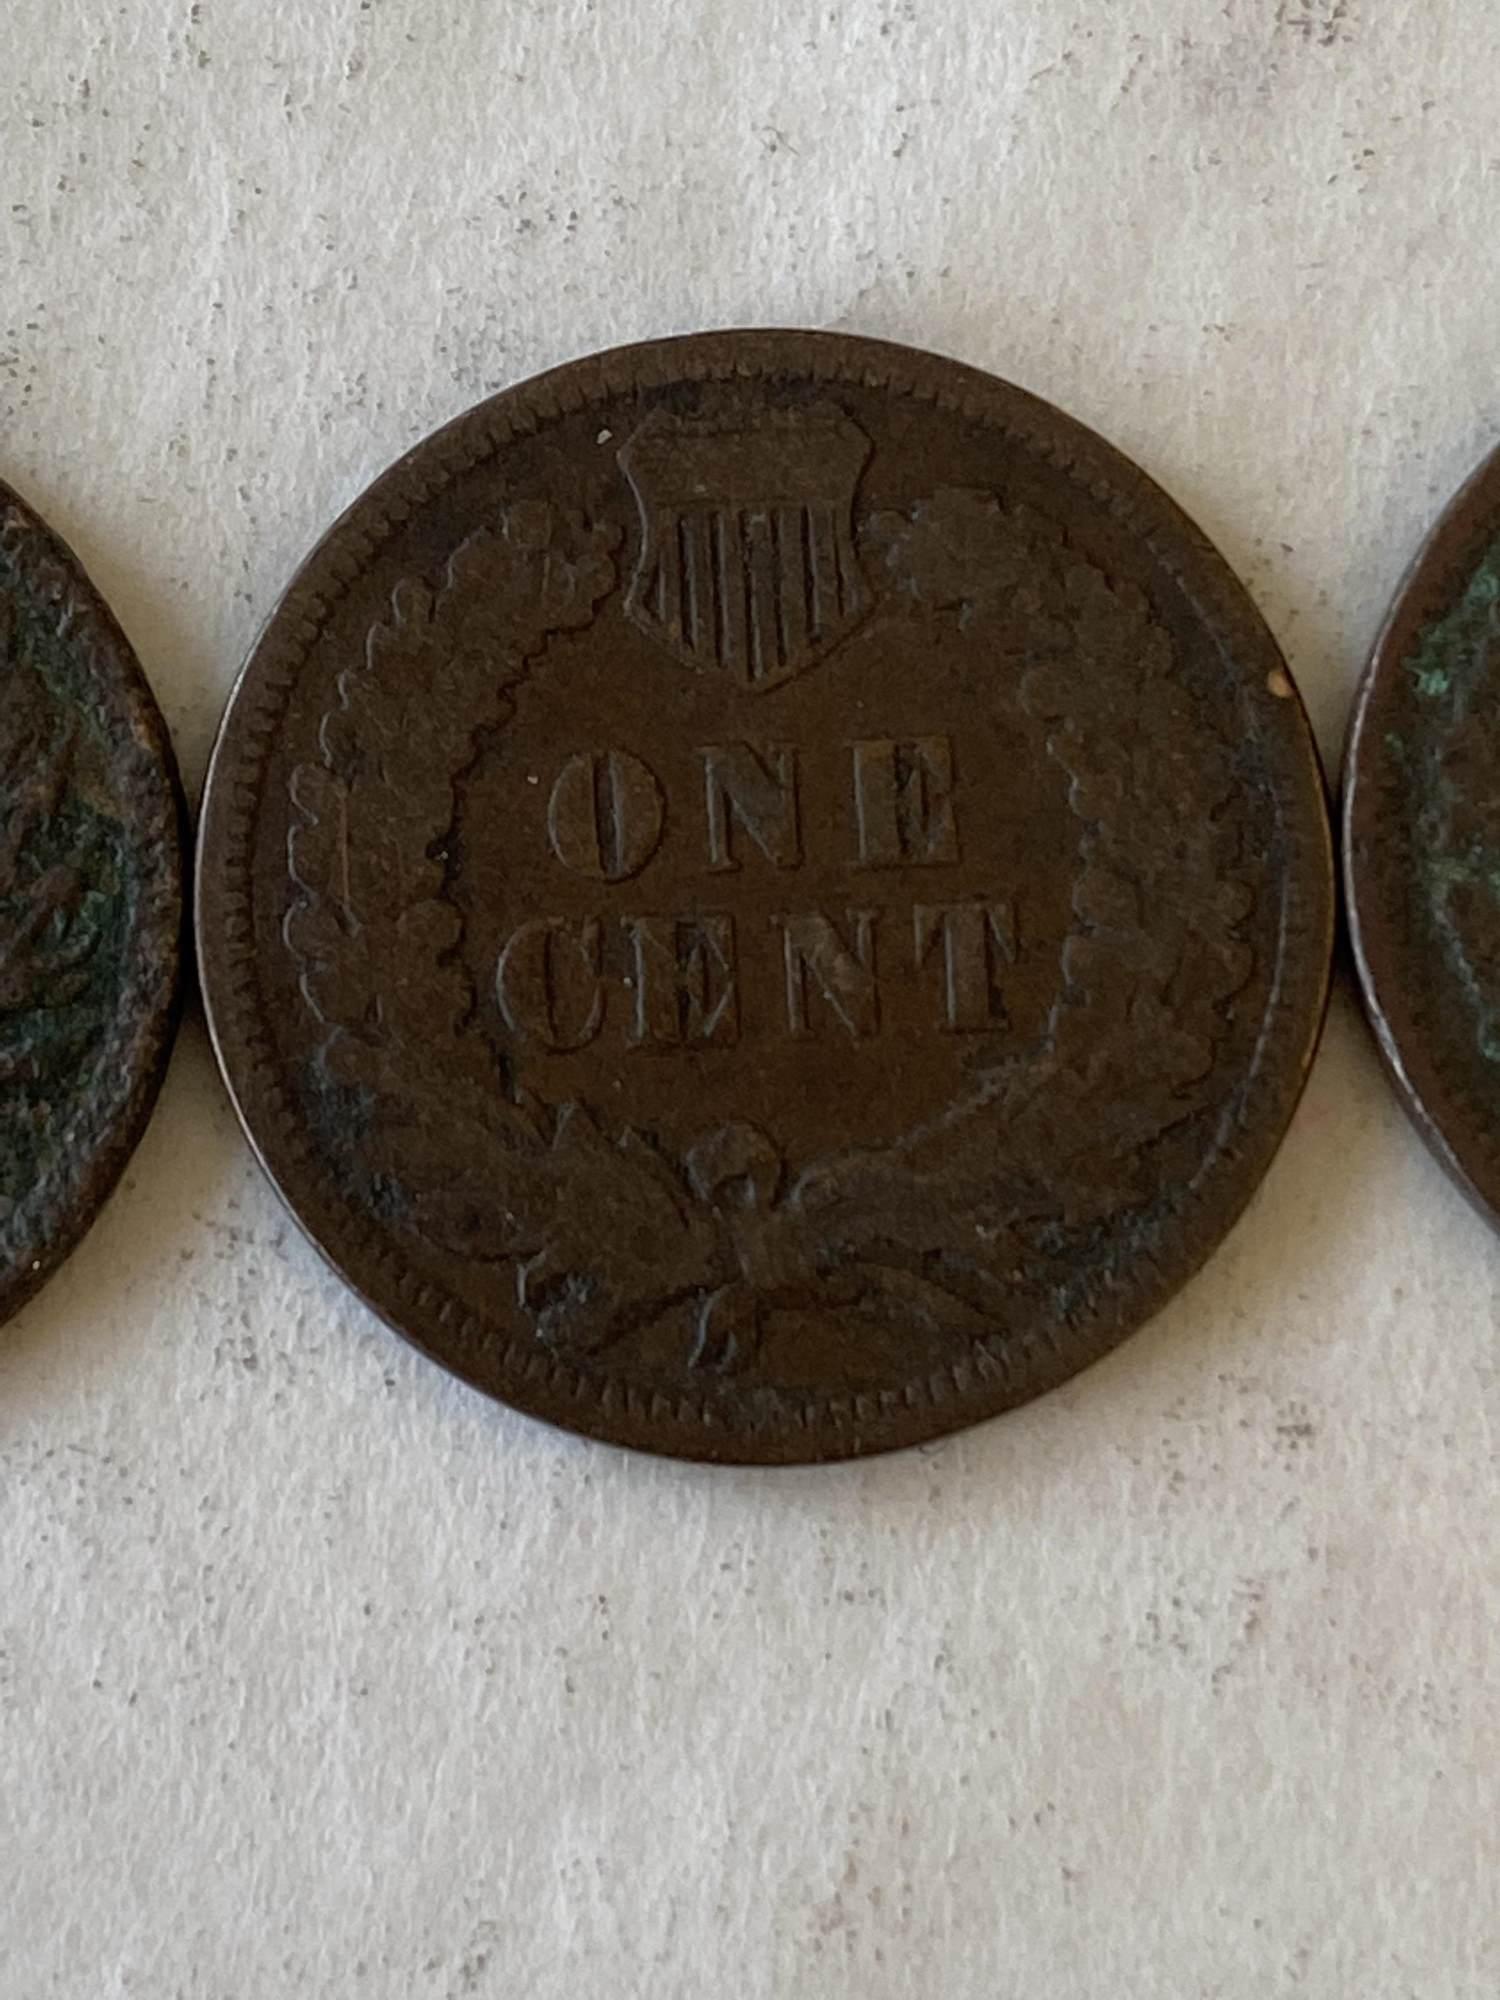 FIVE INDIAN HEAD CENTS